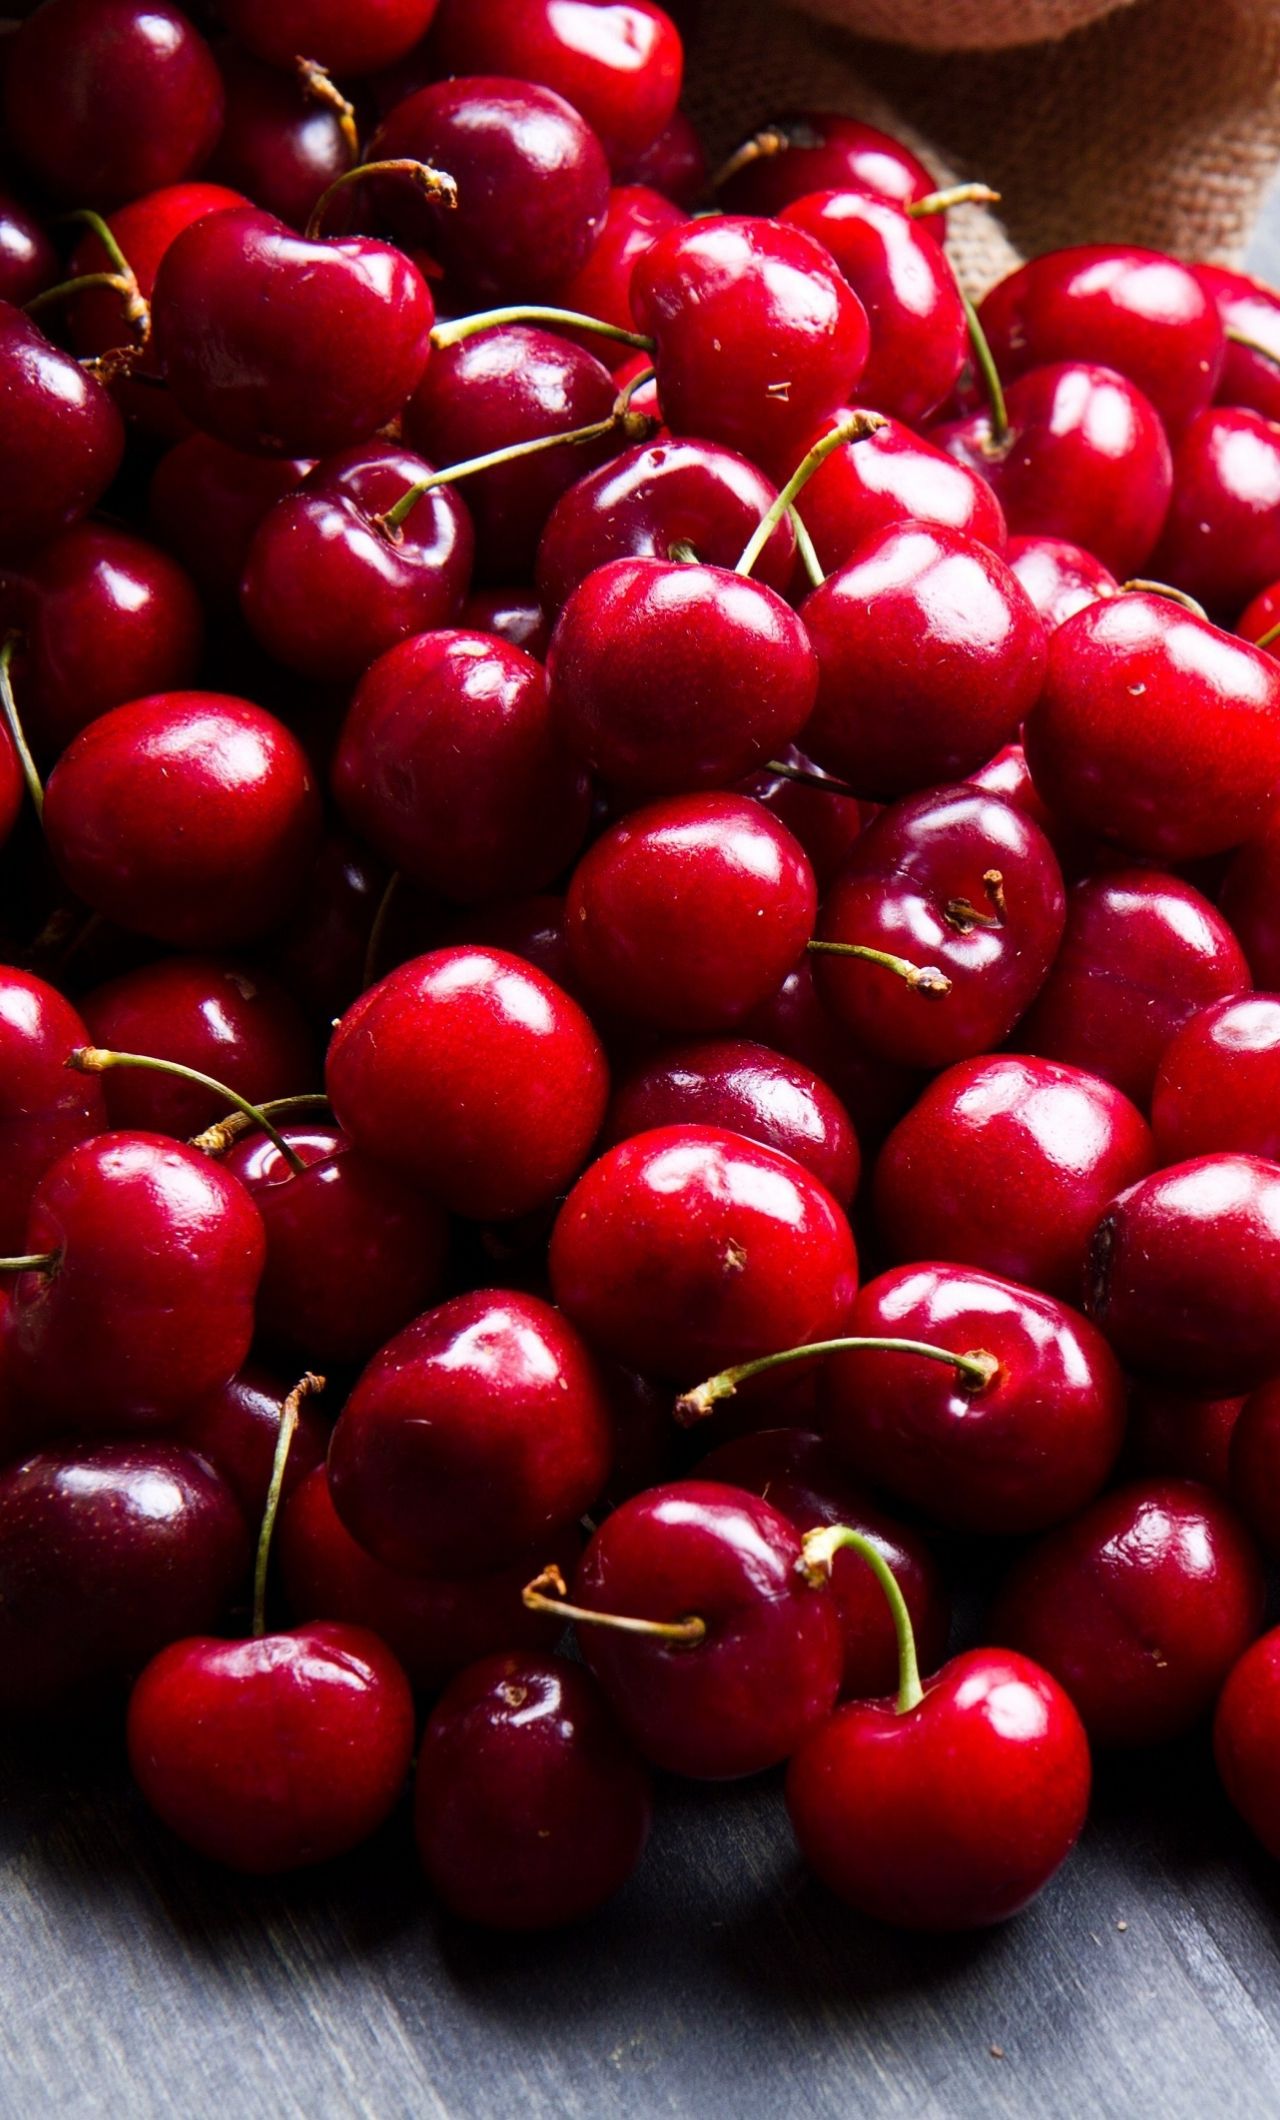 Download wallpaper 1280x2120 shine, red cherry, fruit, iphone 6 plus, 1280x2120 HD background, 24686